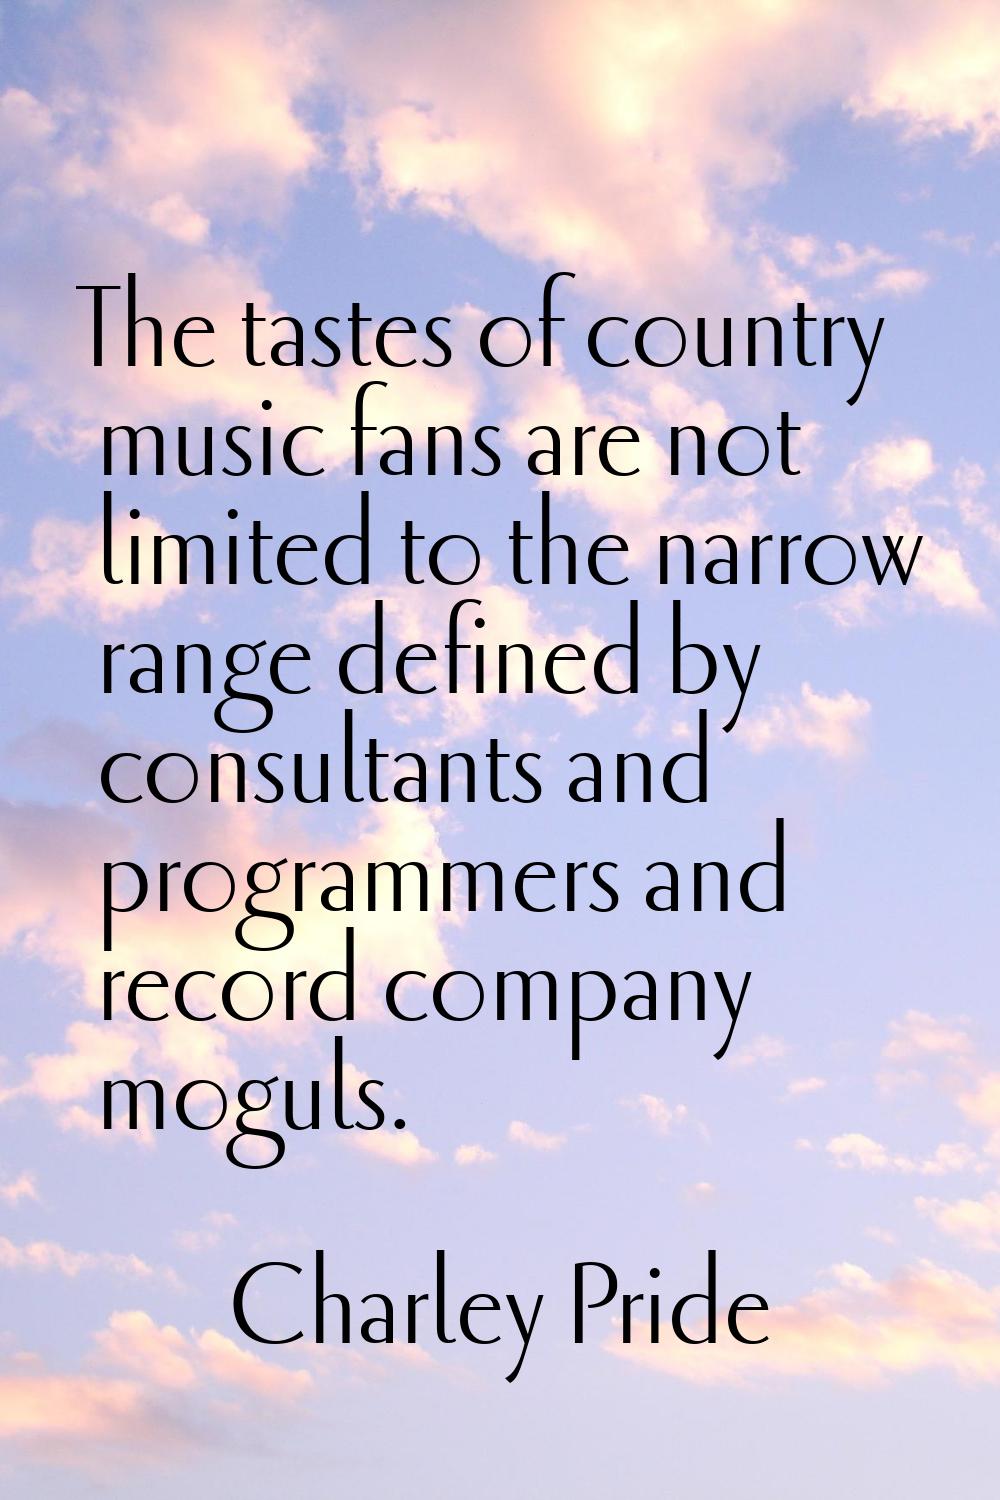 The tastes of country music fans are not limited to the narrow range defined by consultants and pro